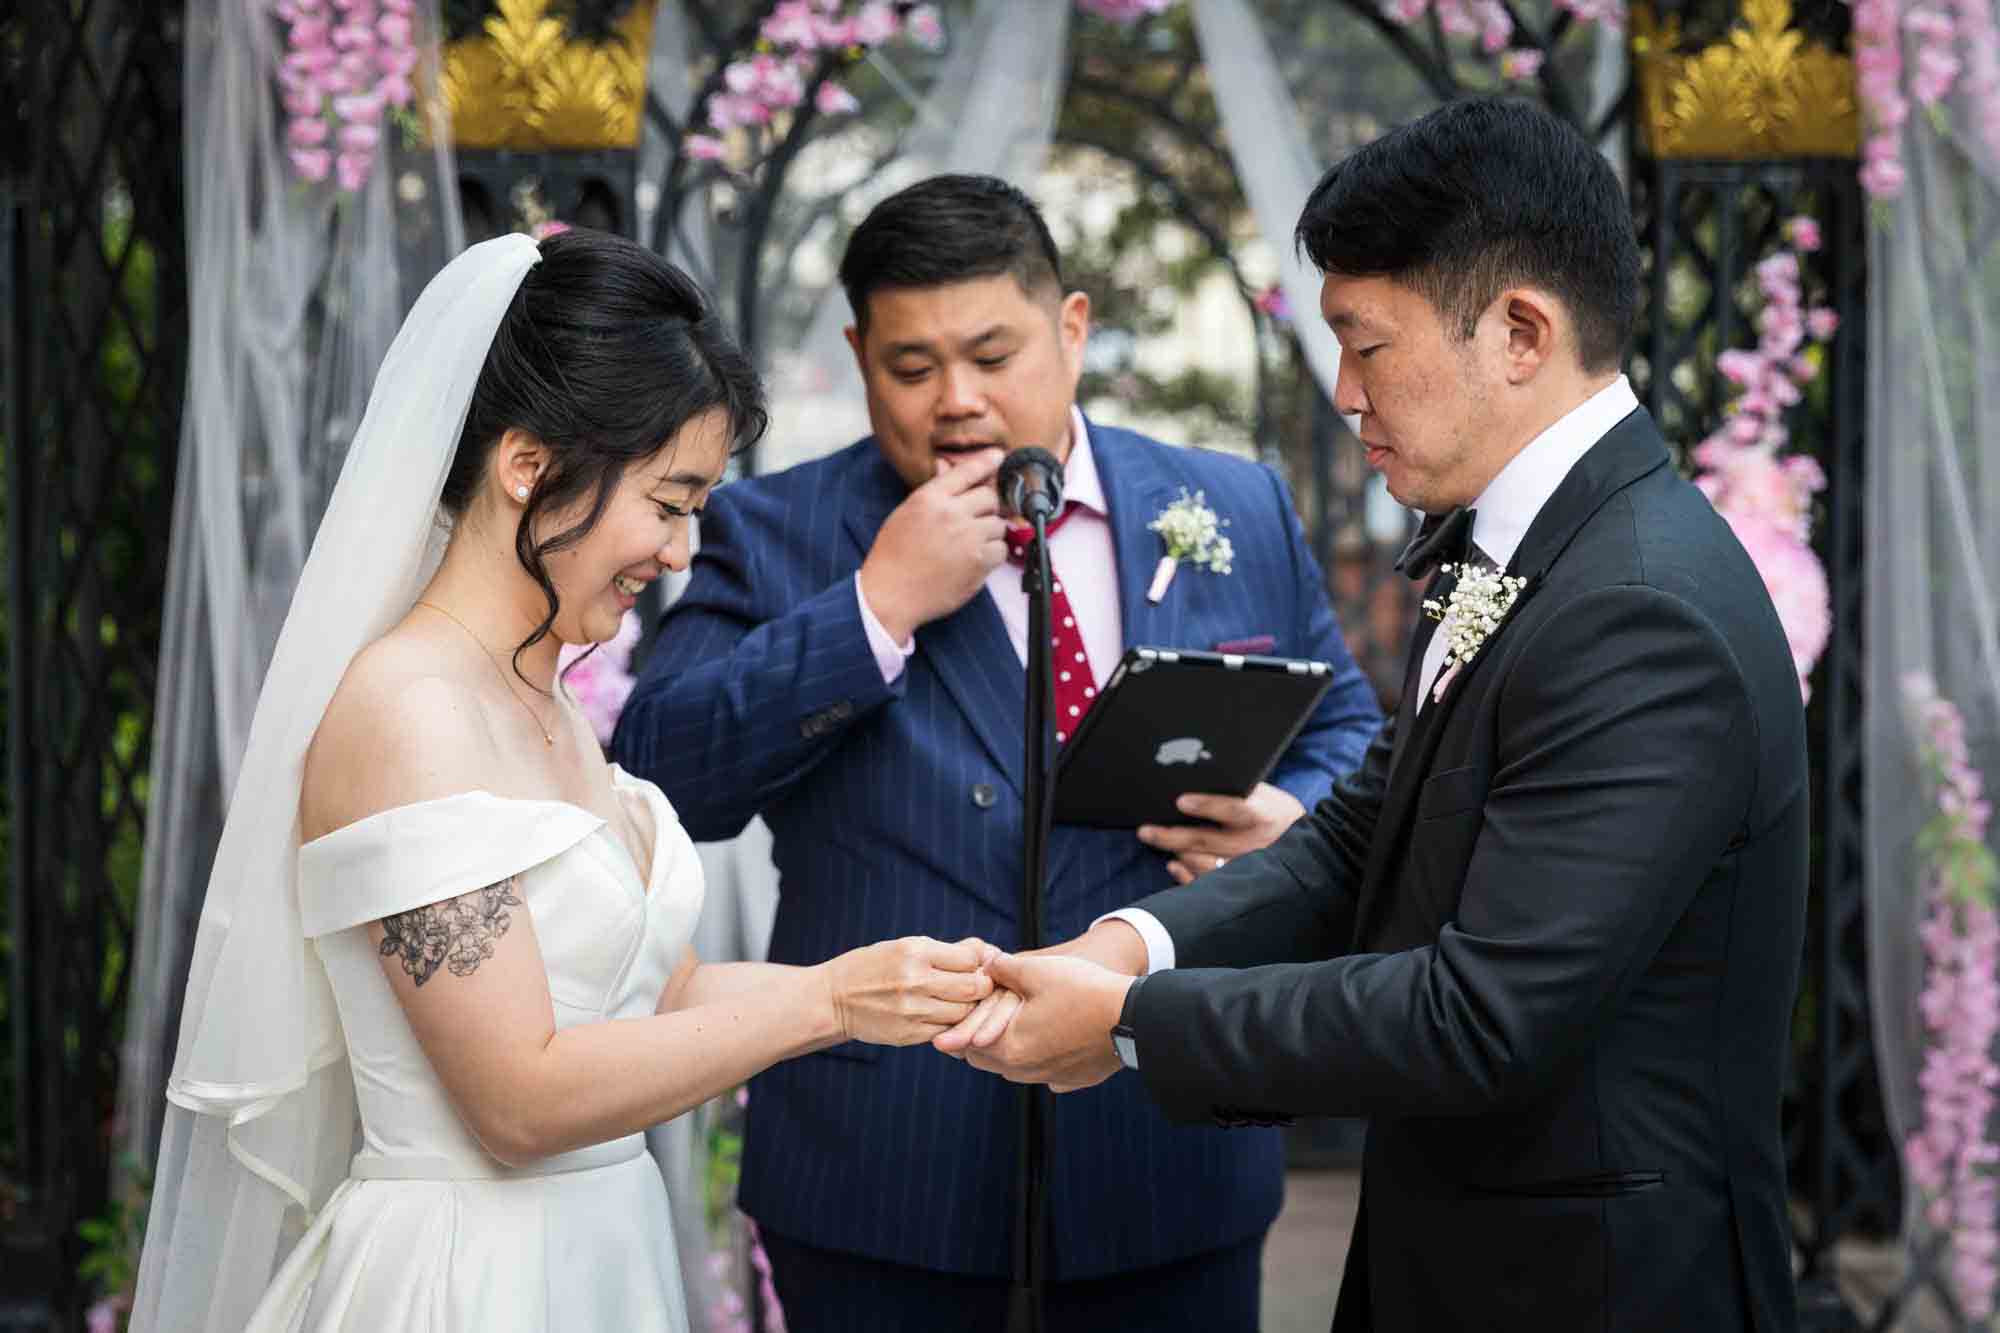 Groom putting ring on bride's finger during ceremony at a Sheraton LaGuardia East Hotel wedding